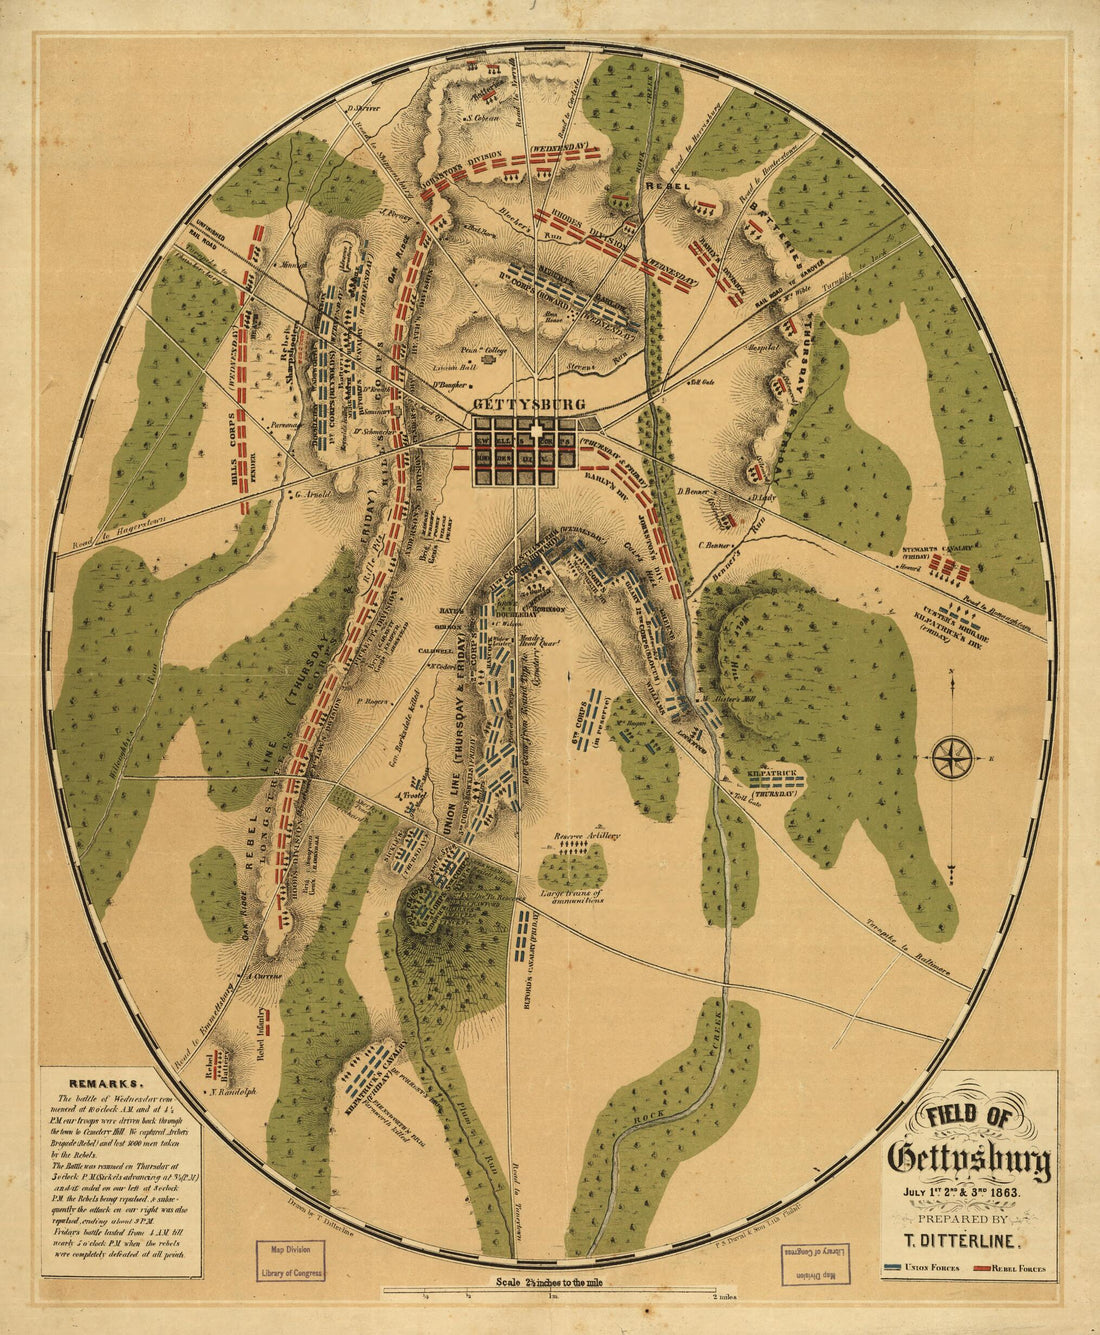 This old map of Field of Gettysburg, July 1st, 2nd &amp; 3rd, from 1863 was created by T. (Theodore) Ditterline in 1863